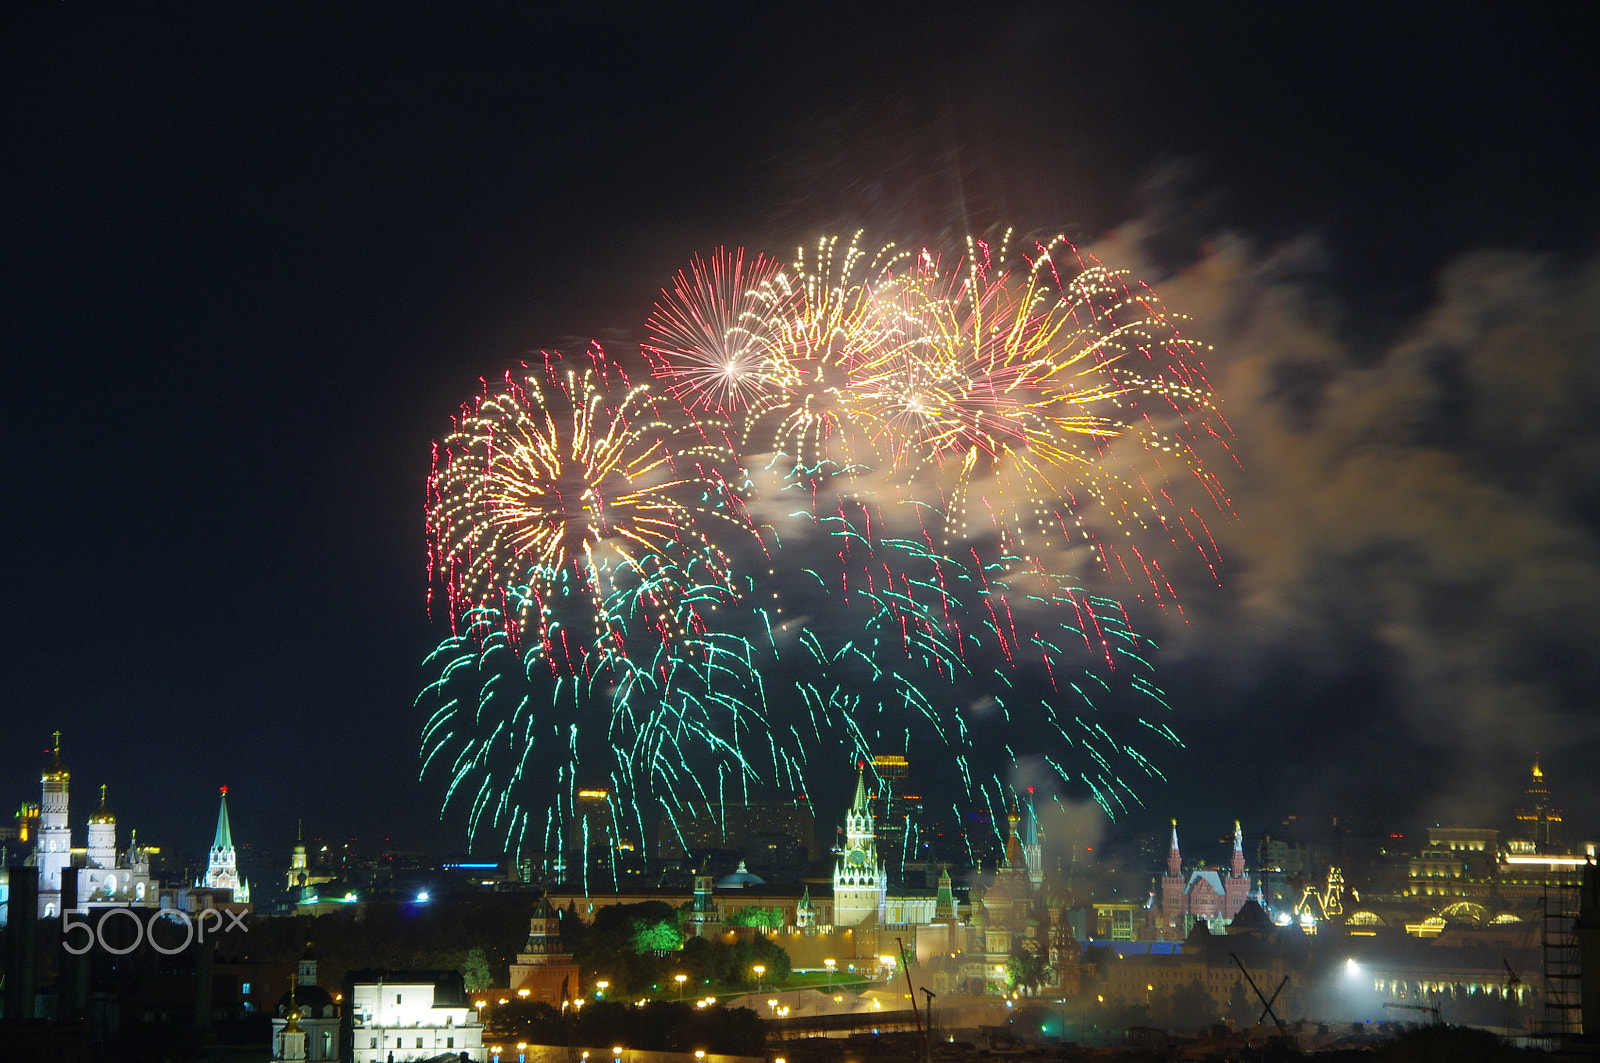 Pentax K-x sample photo. Fireworks on the city day,10/09/2016 - 5 photography